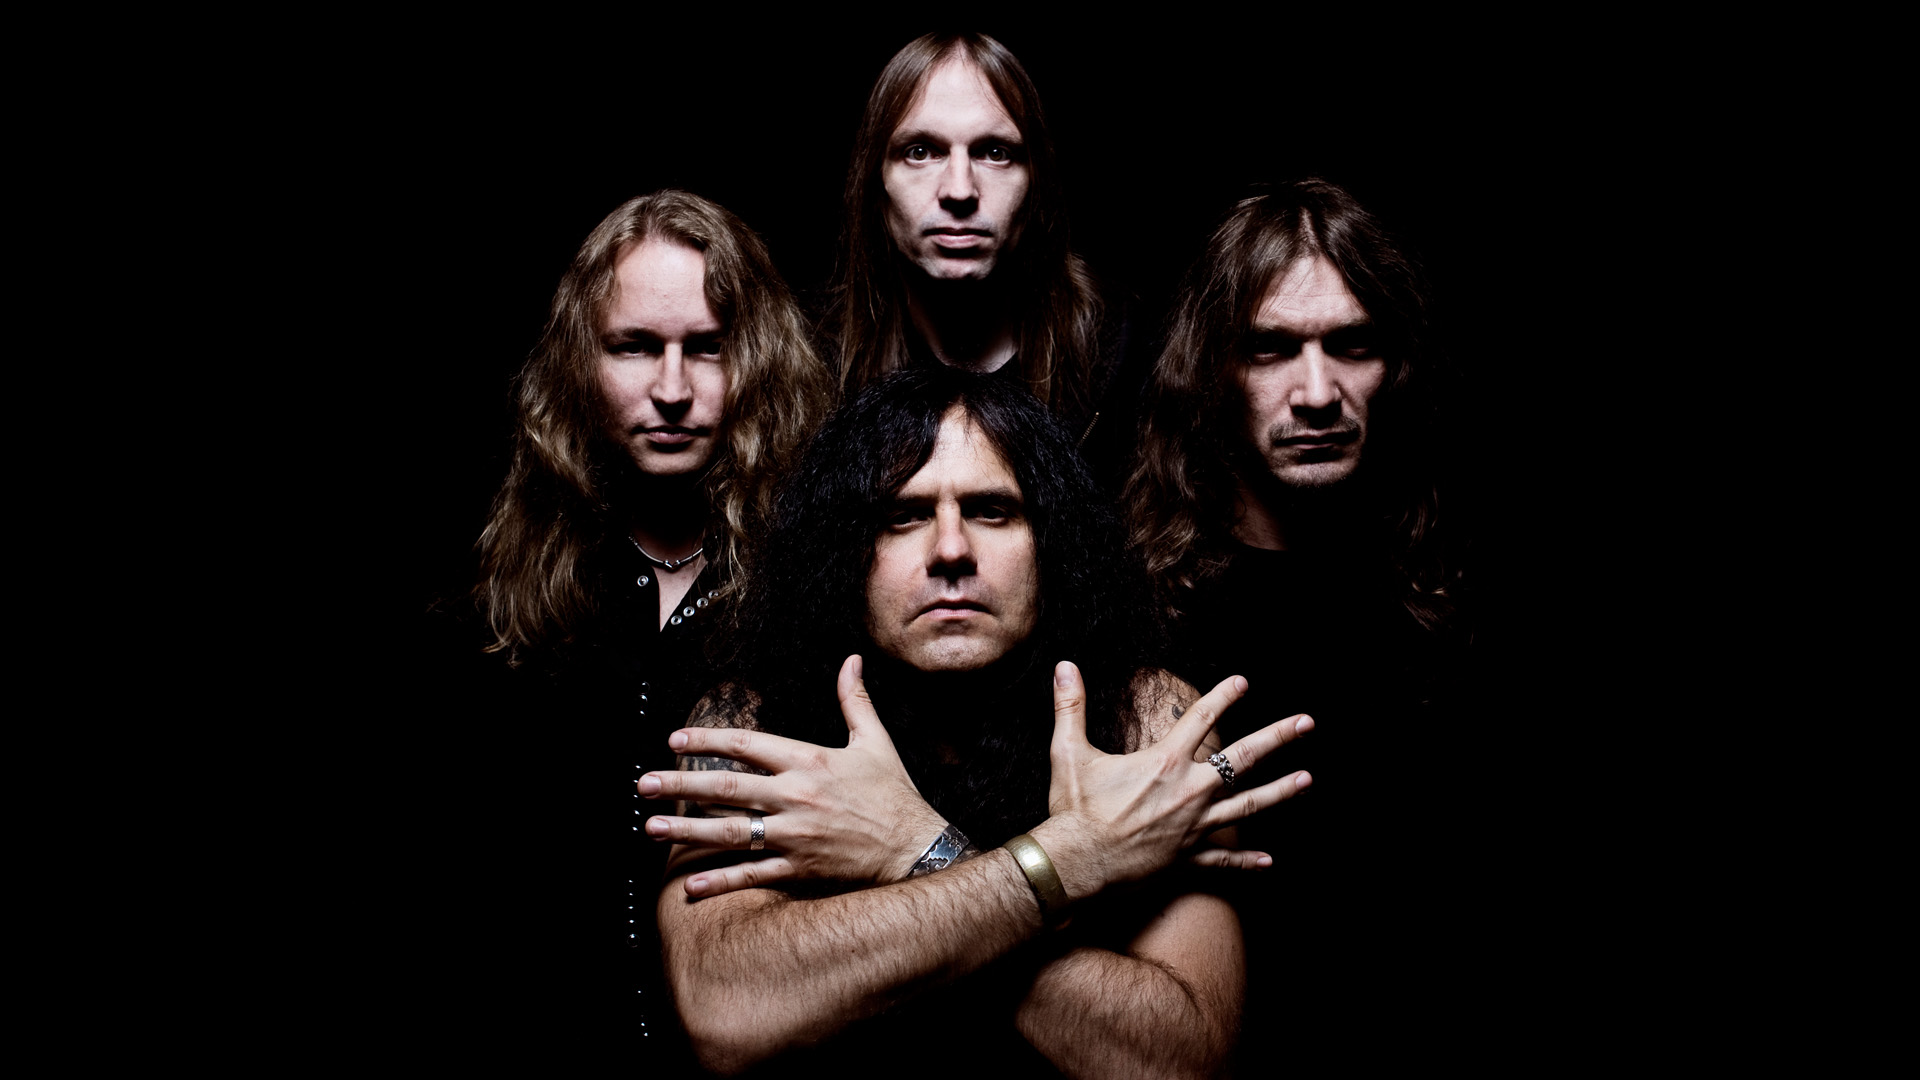 Kreator Backgrounds, Compatible - PC, Mobile, Gadgets| 1920x1080 px